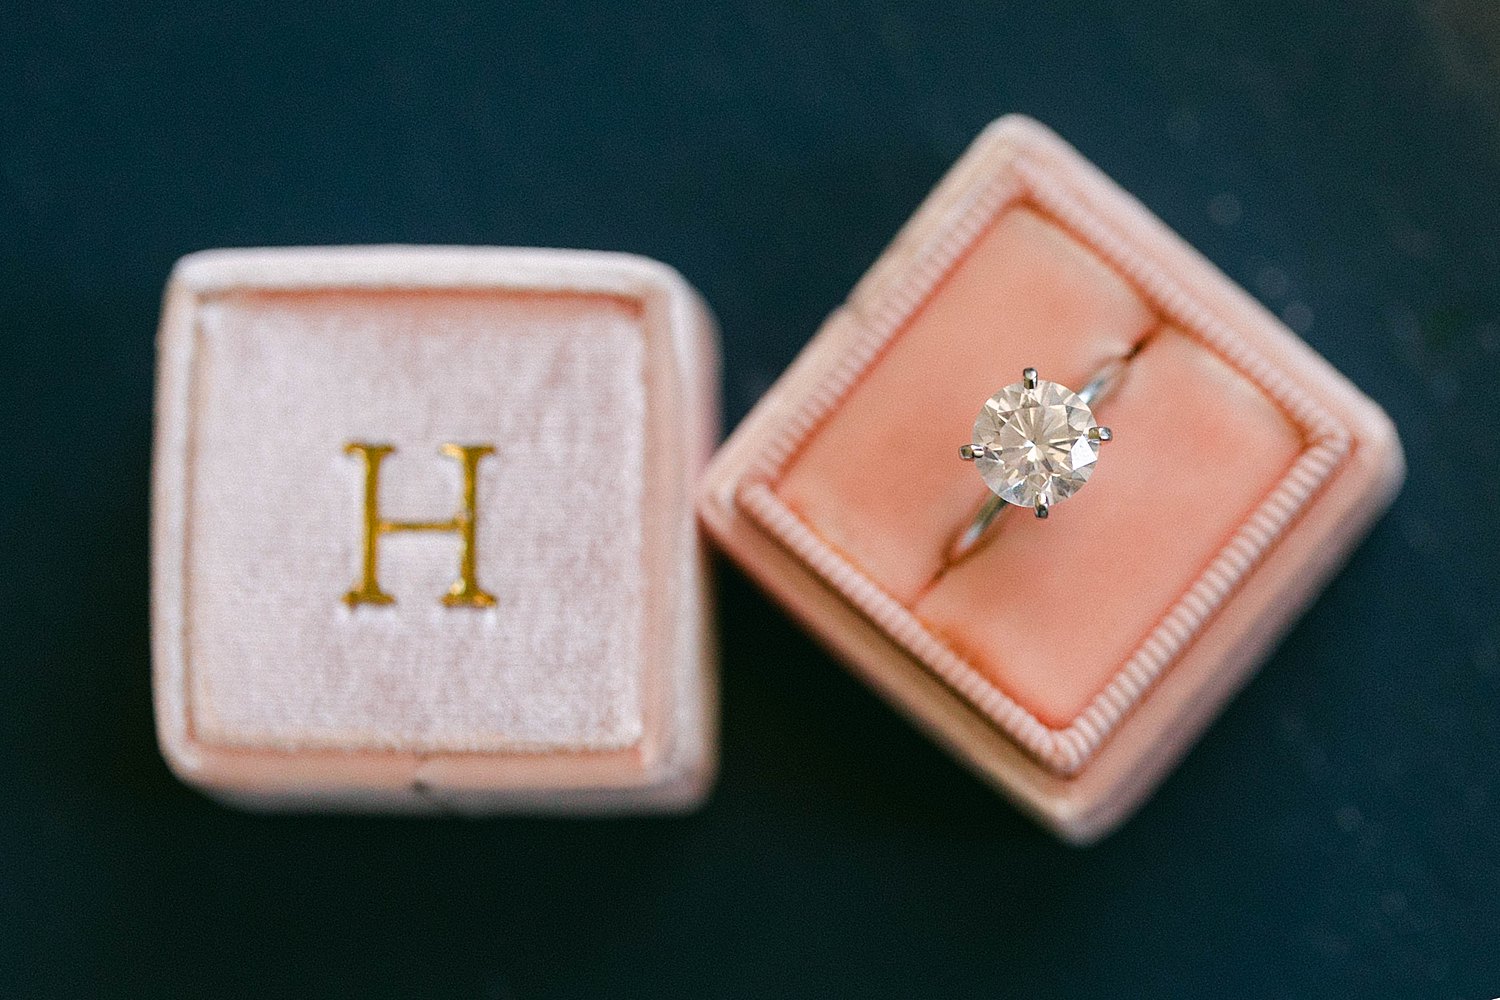 Diamond ring with gold band sitting in pink ring box with H on top